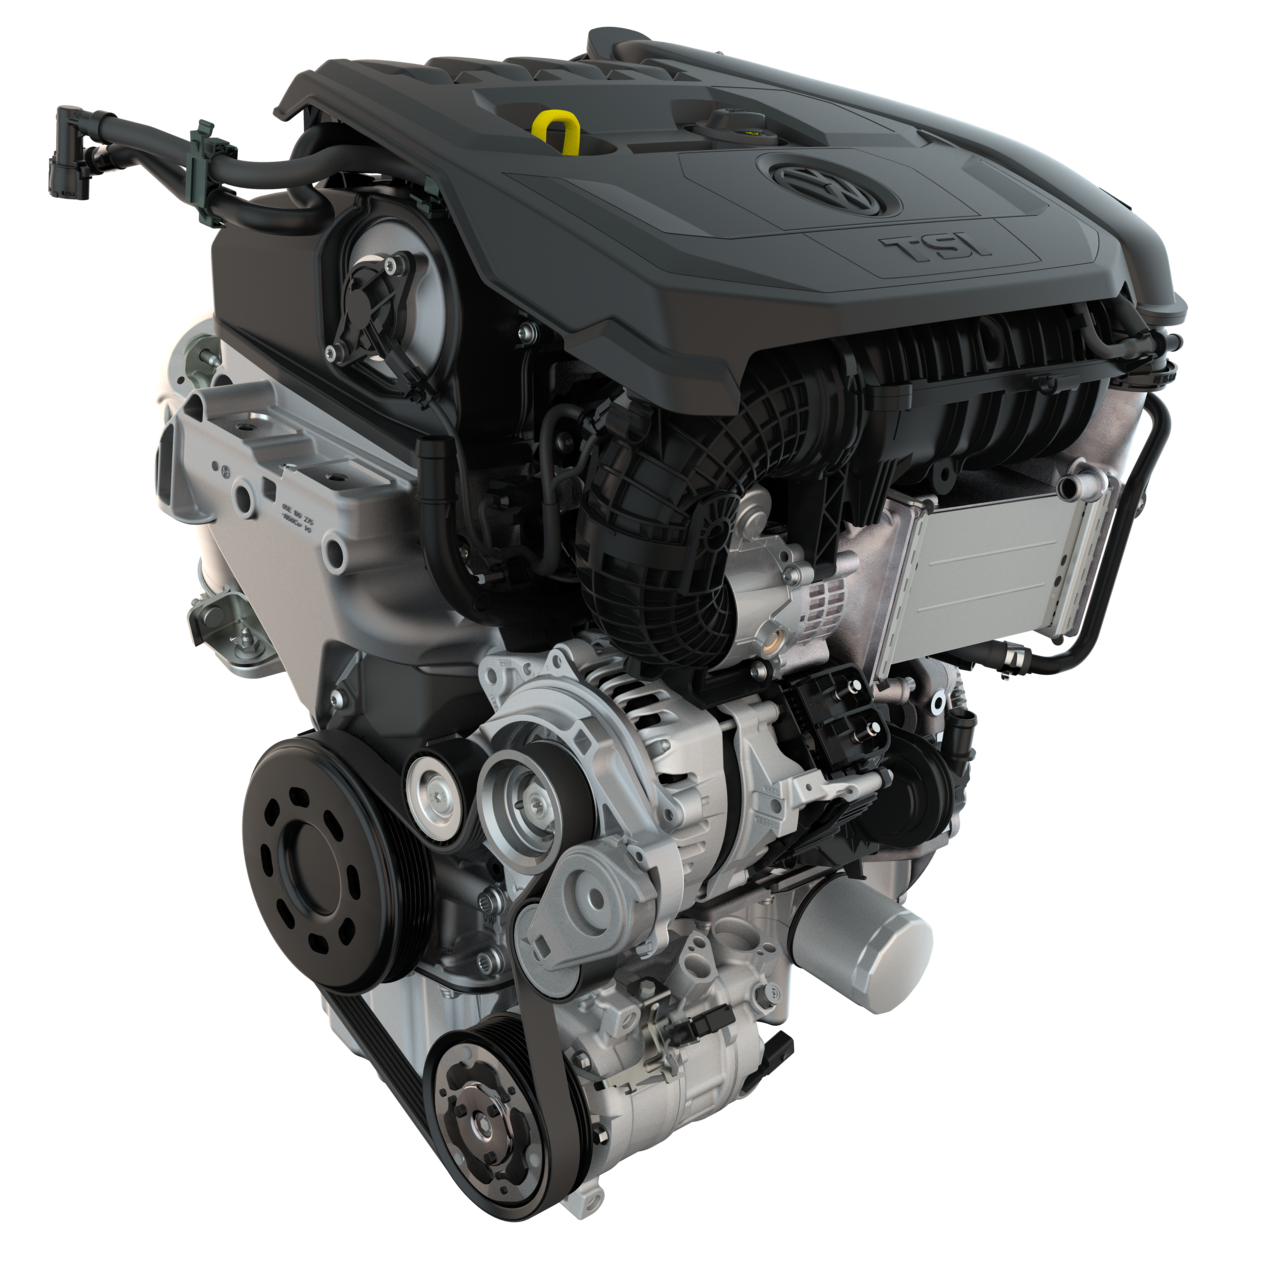 EA211 engine is the mainstream engine of the new generation of VAG cars.